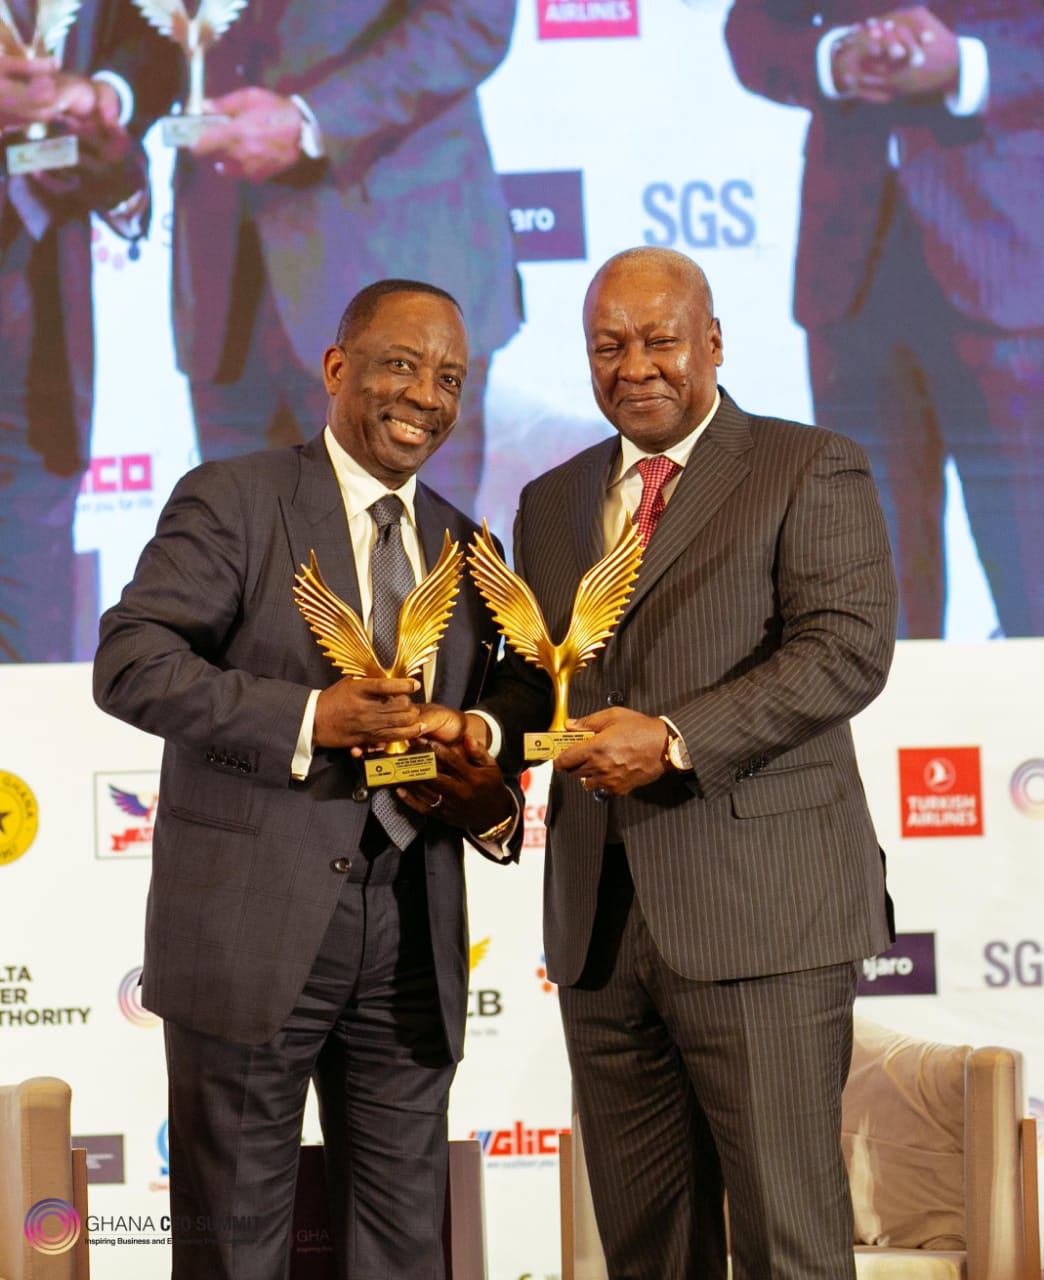 KGL’s Executive chairman, Alex Apau Dadey awarded overall CEO of the year